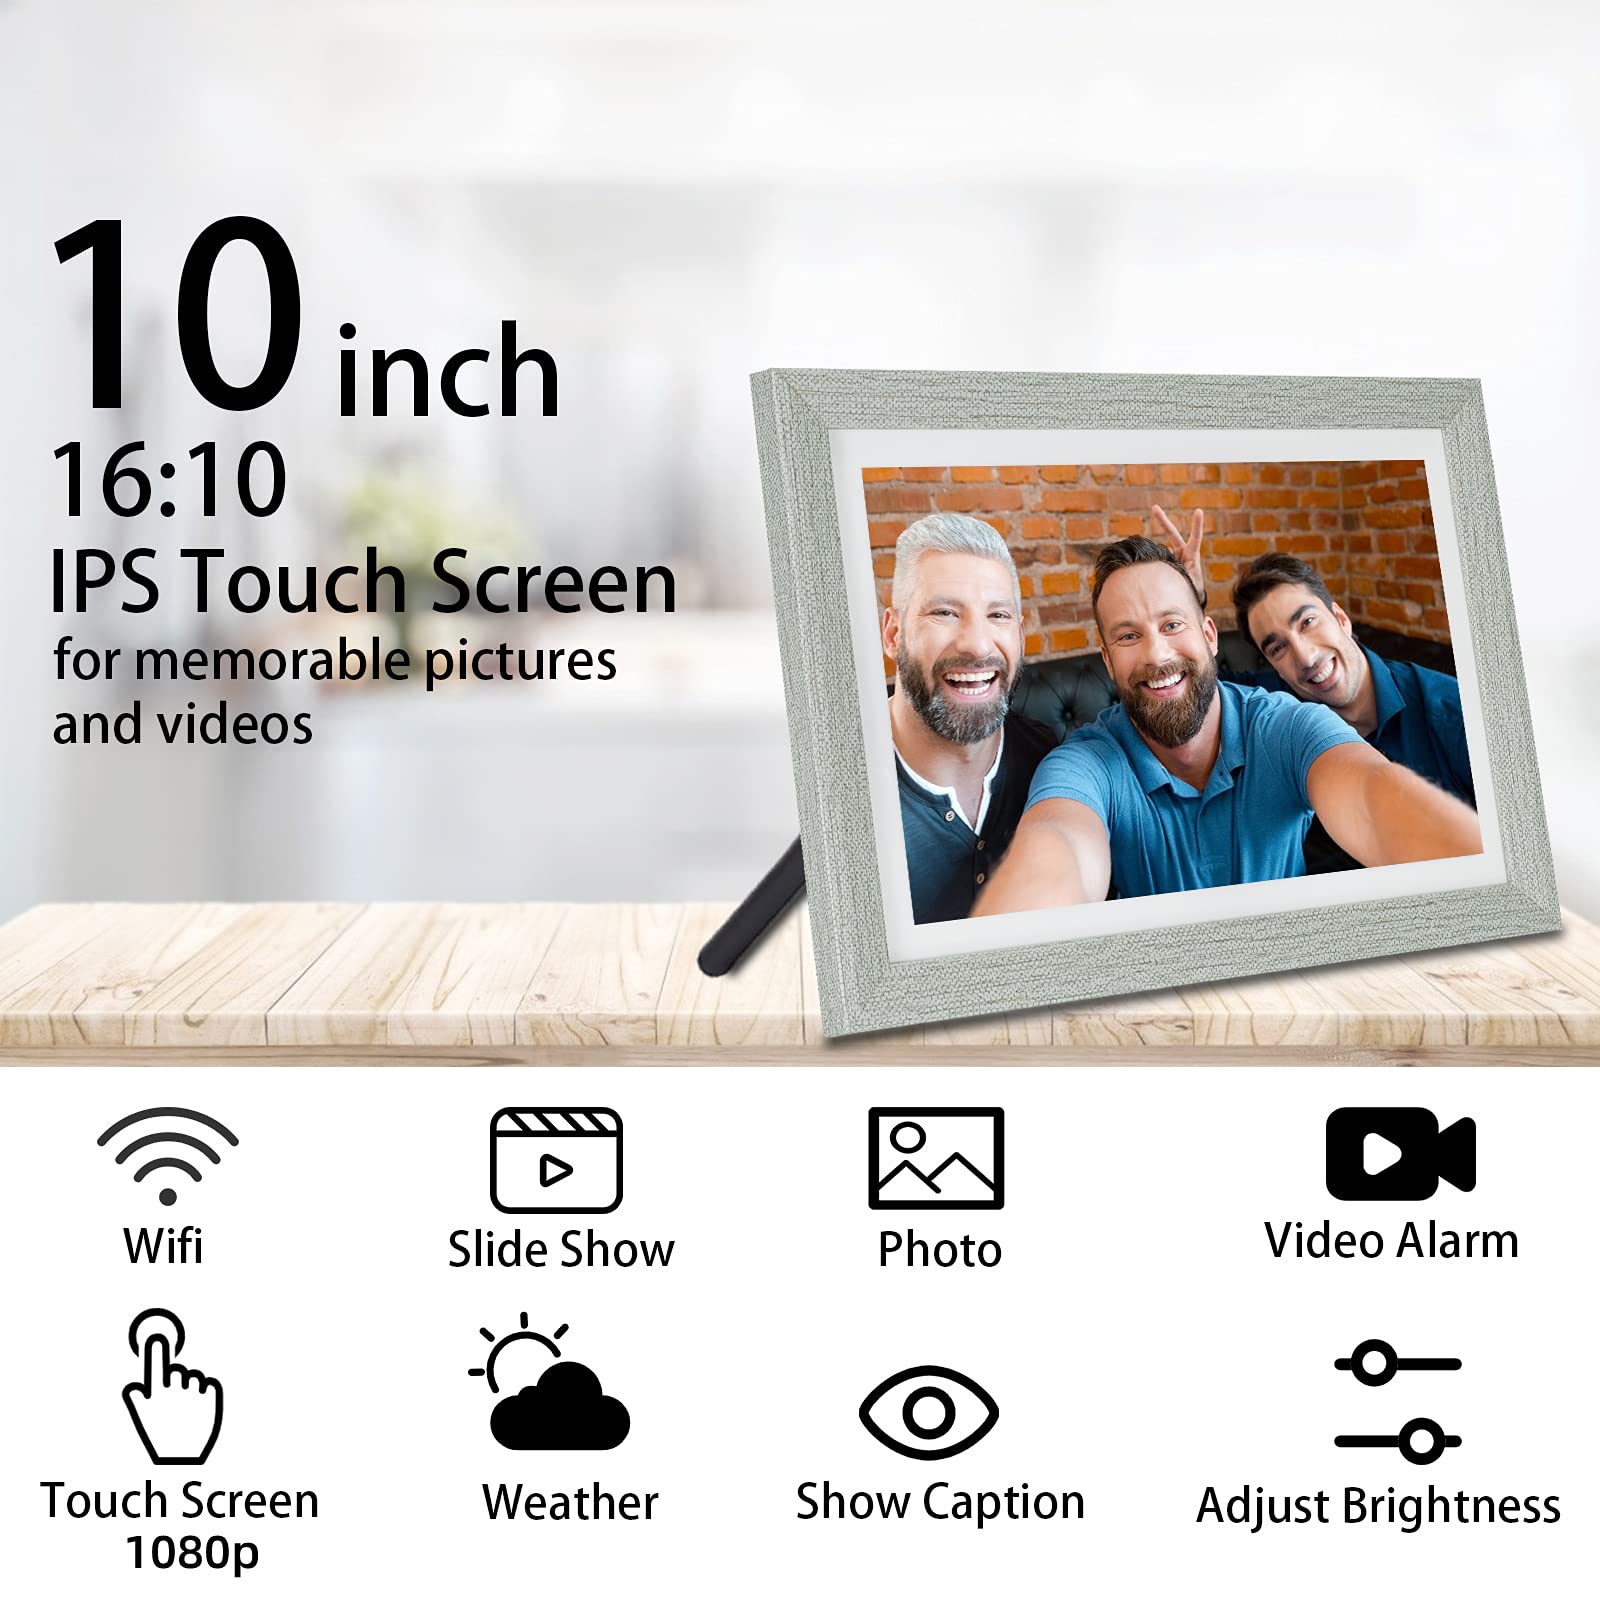 Digital Photo Frame WiFi 10 Inch Touch Screen,HAOVM HD IPS Display Digital Picture Frame with 16GB Storage, Auto-Rotate, Motion Sensor, Easy Setup to Share Photos & Videos Email,Cloud,via VPhoto APP